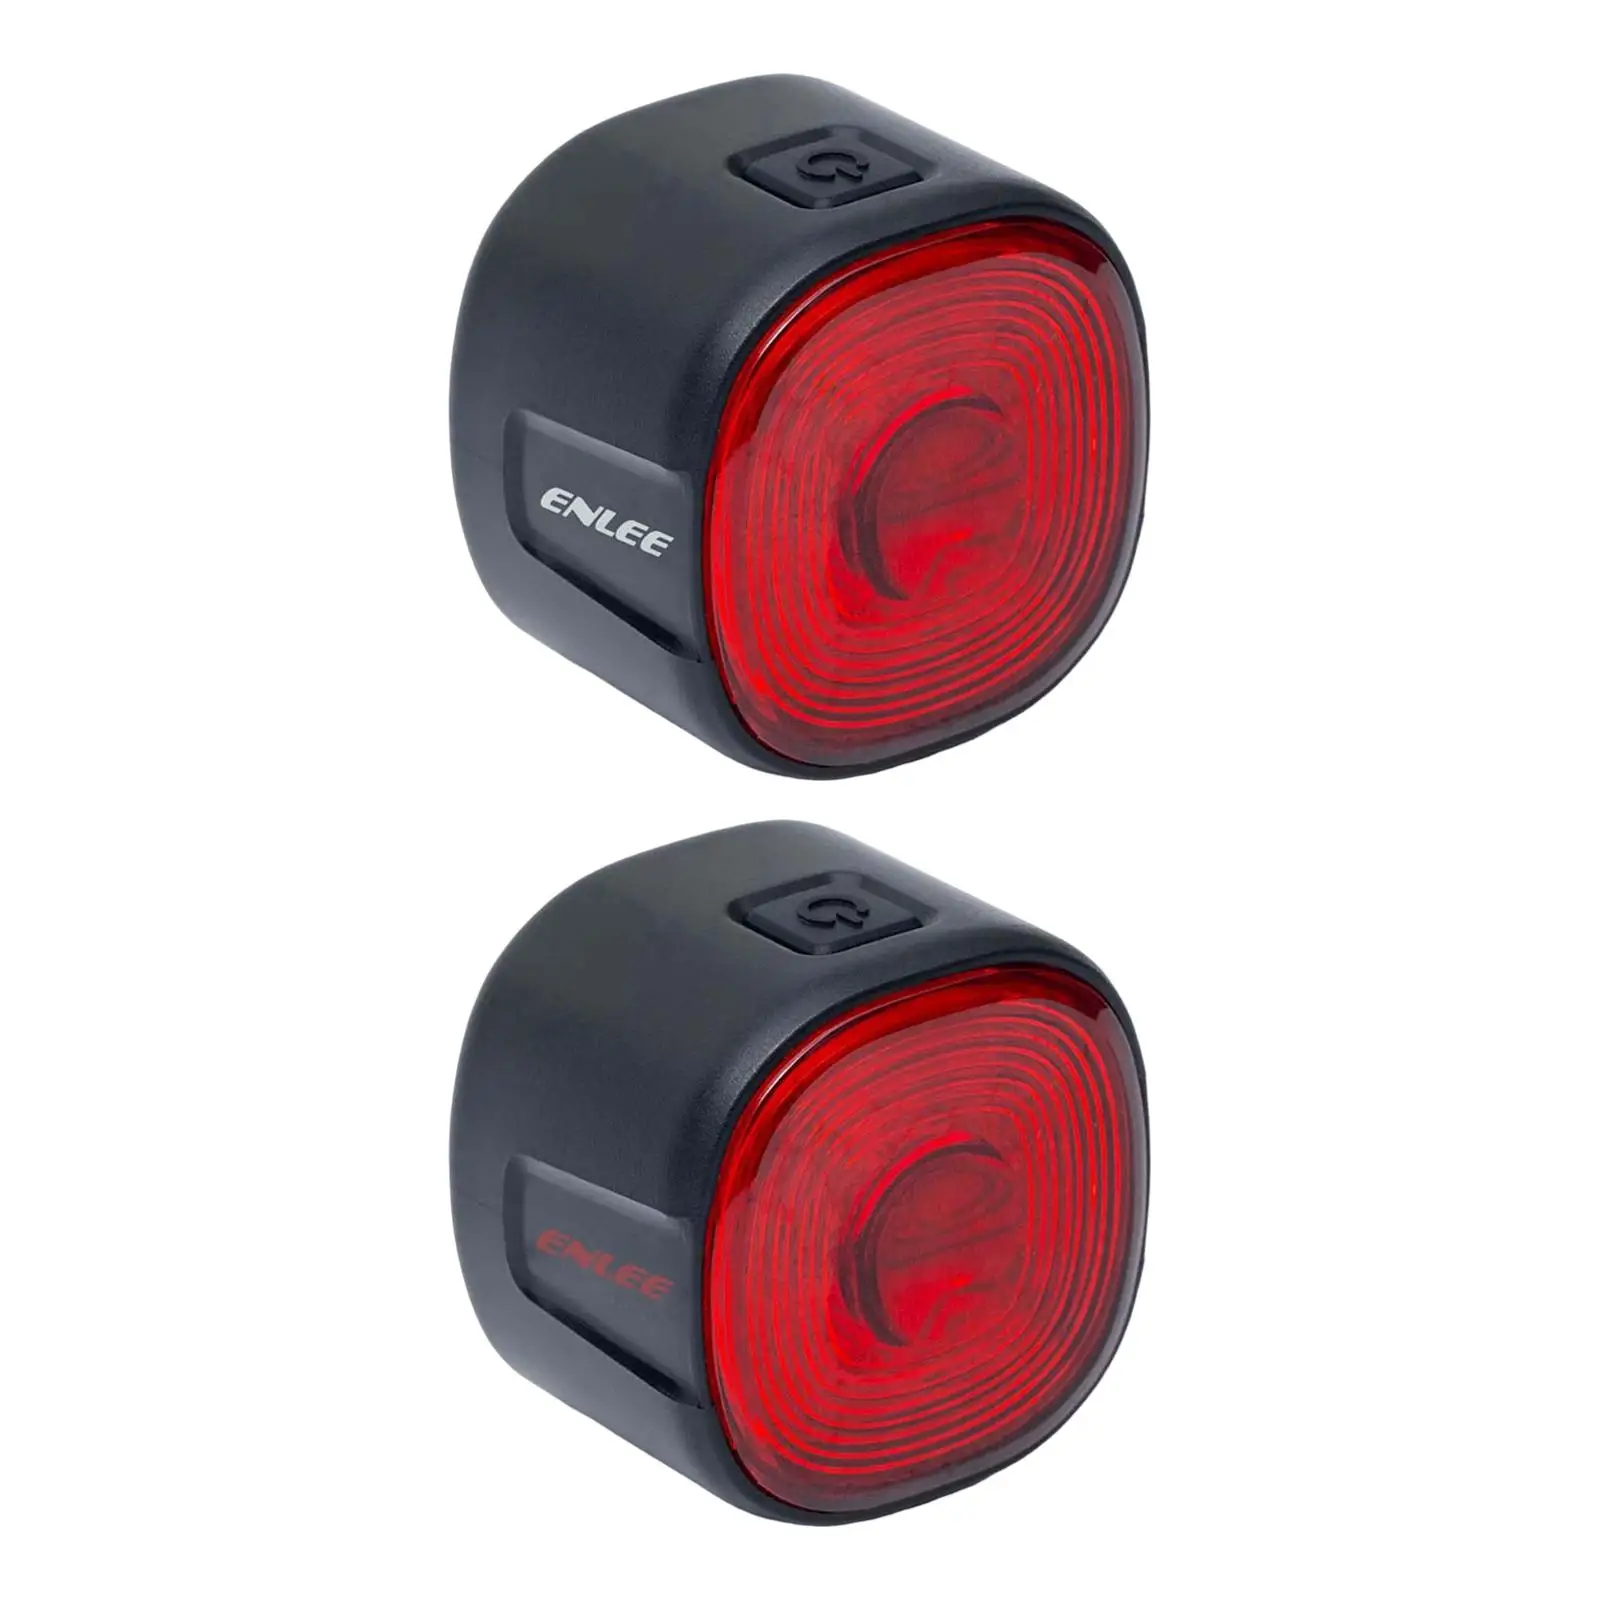 Light Brake Rear Lights USB Rechargeable Cycling Light IP66 Waterprooflight for Road Night Riding Accessory